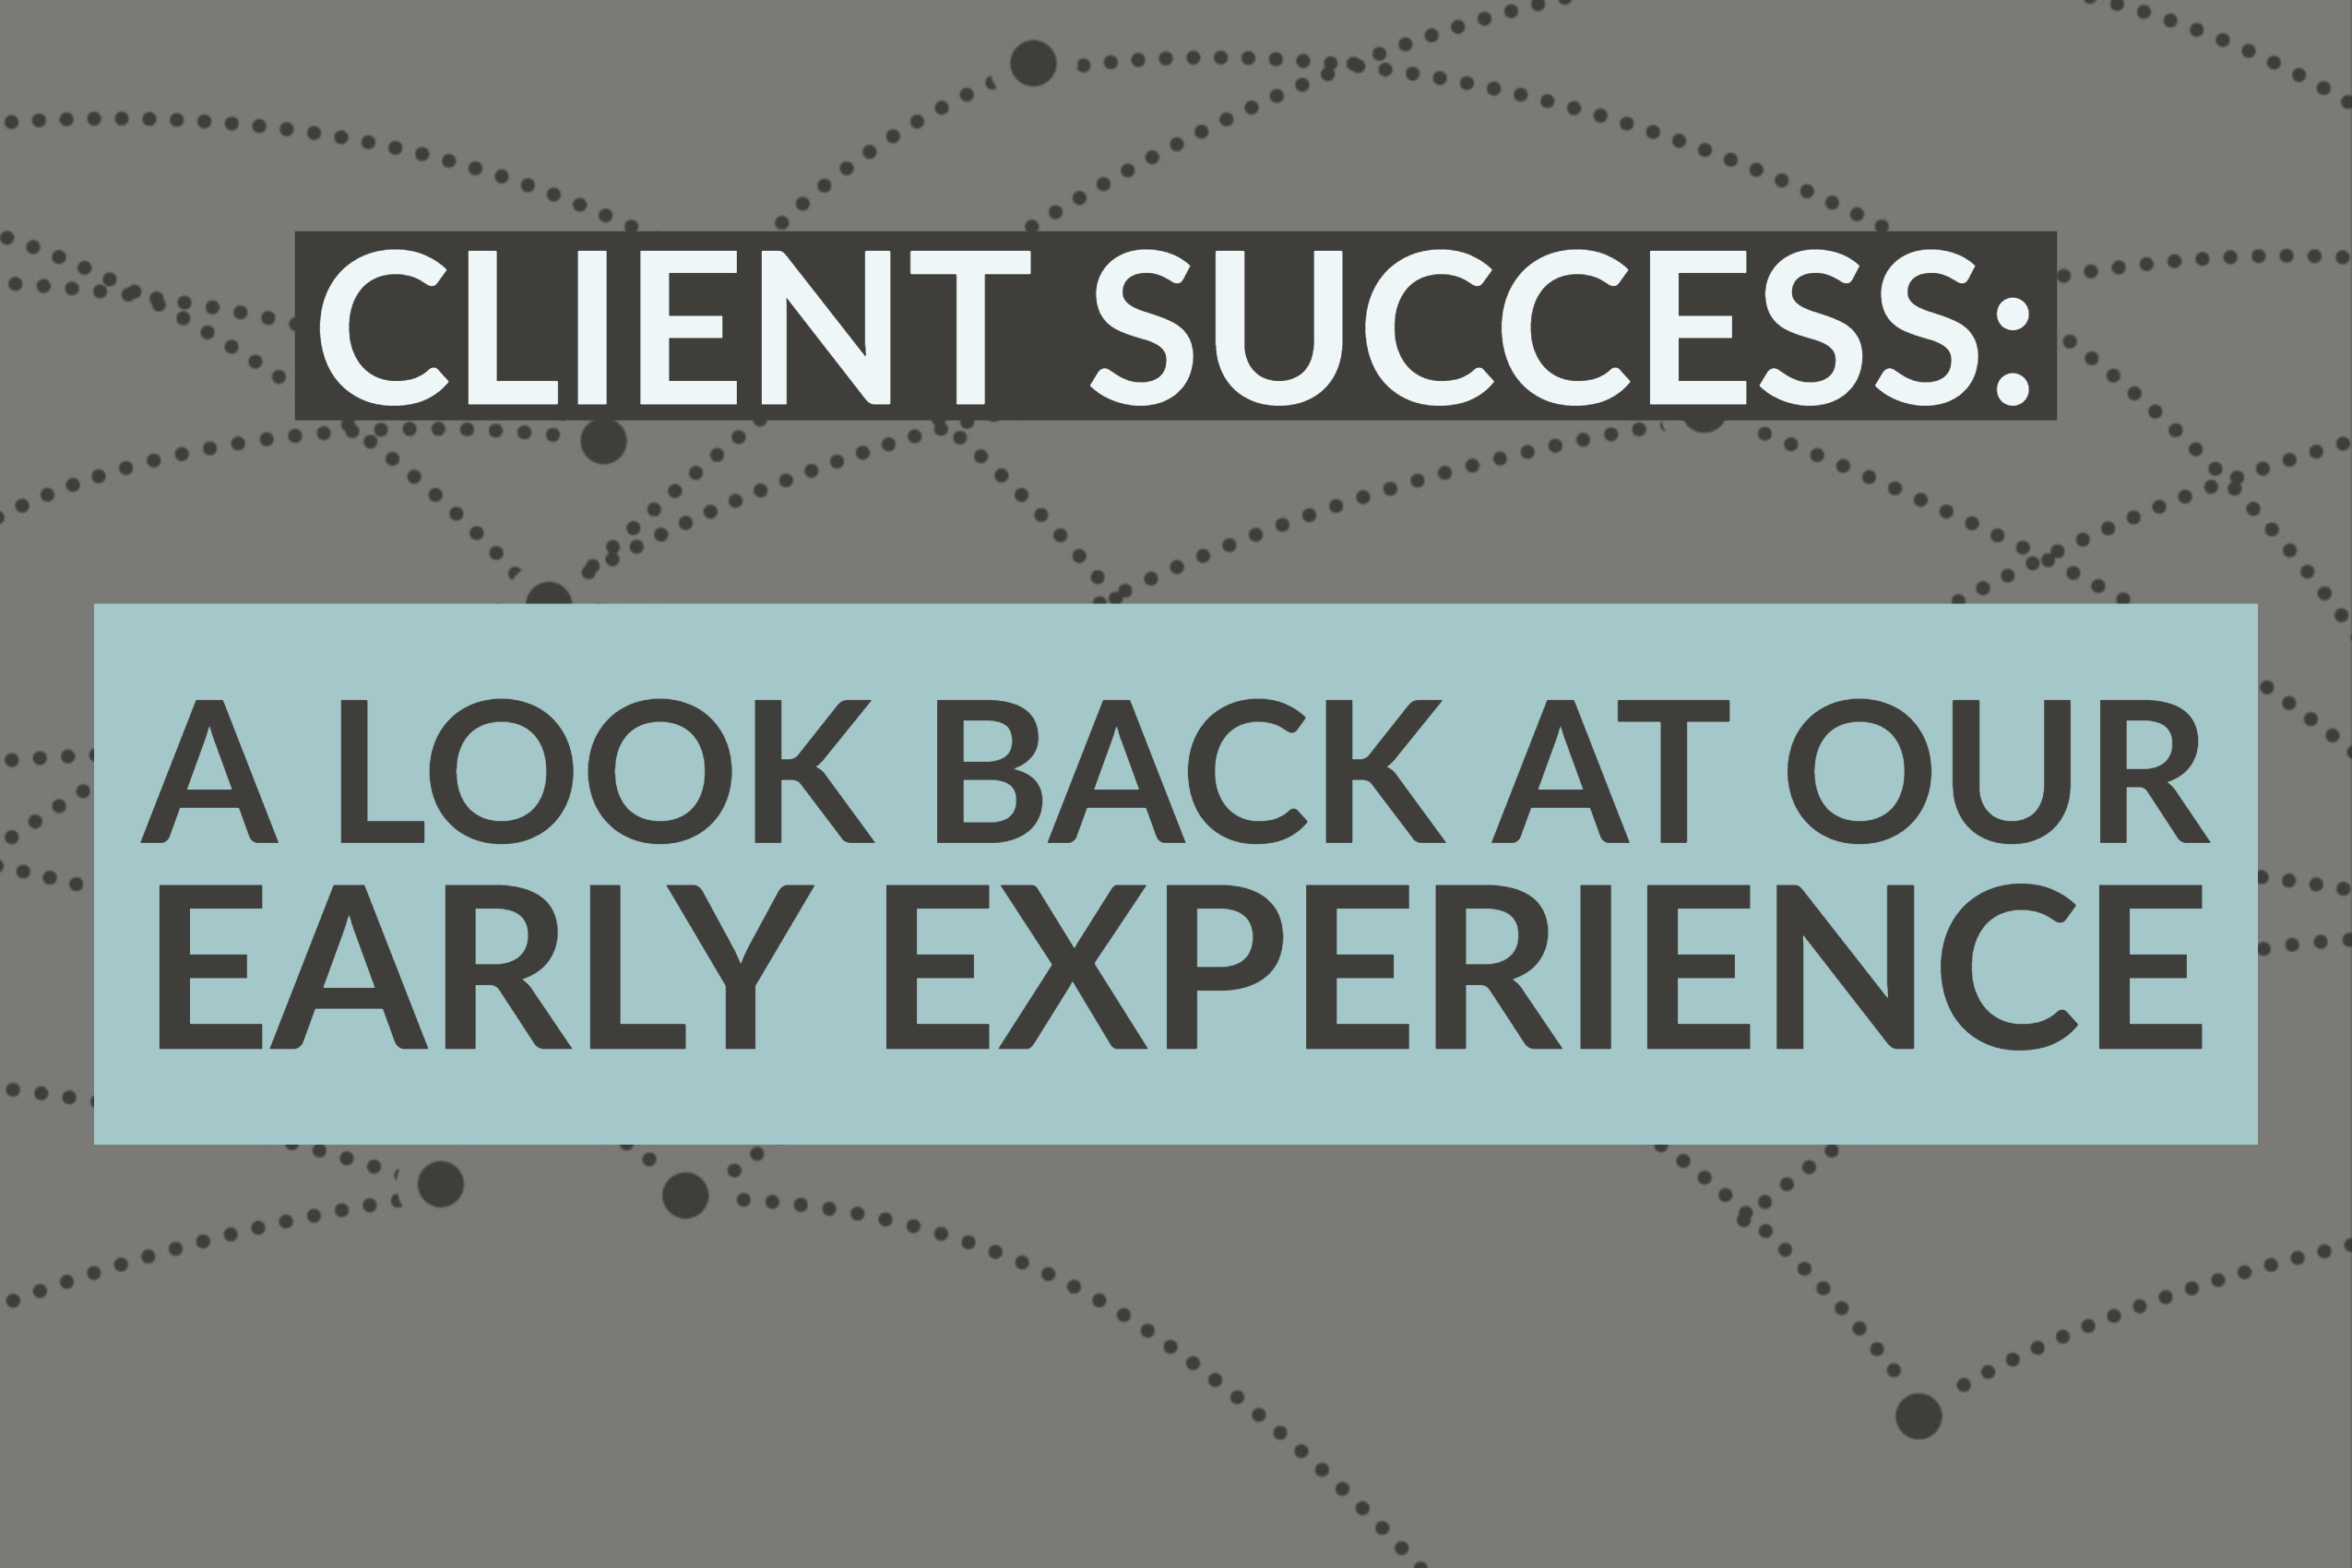 Client Success: A Look Back At Our Early Experience